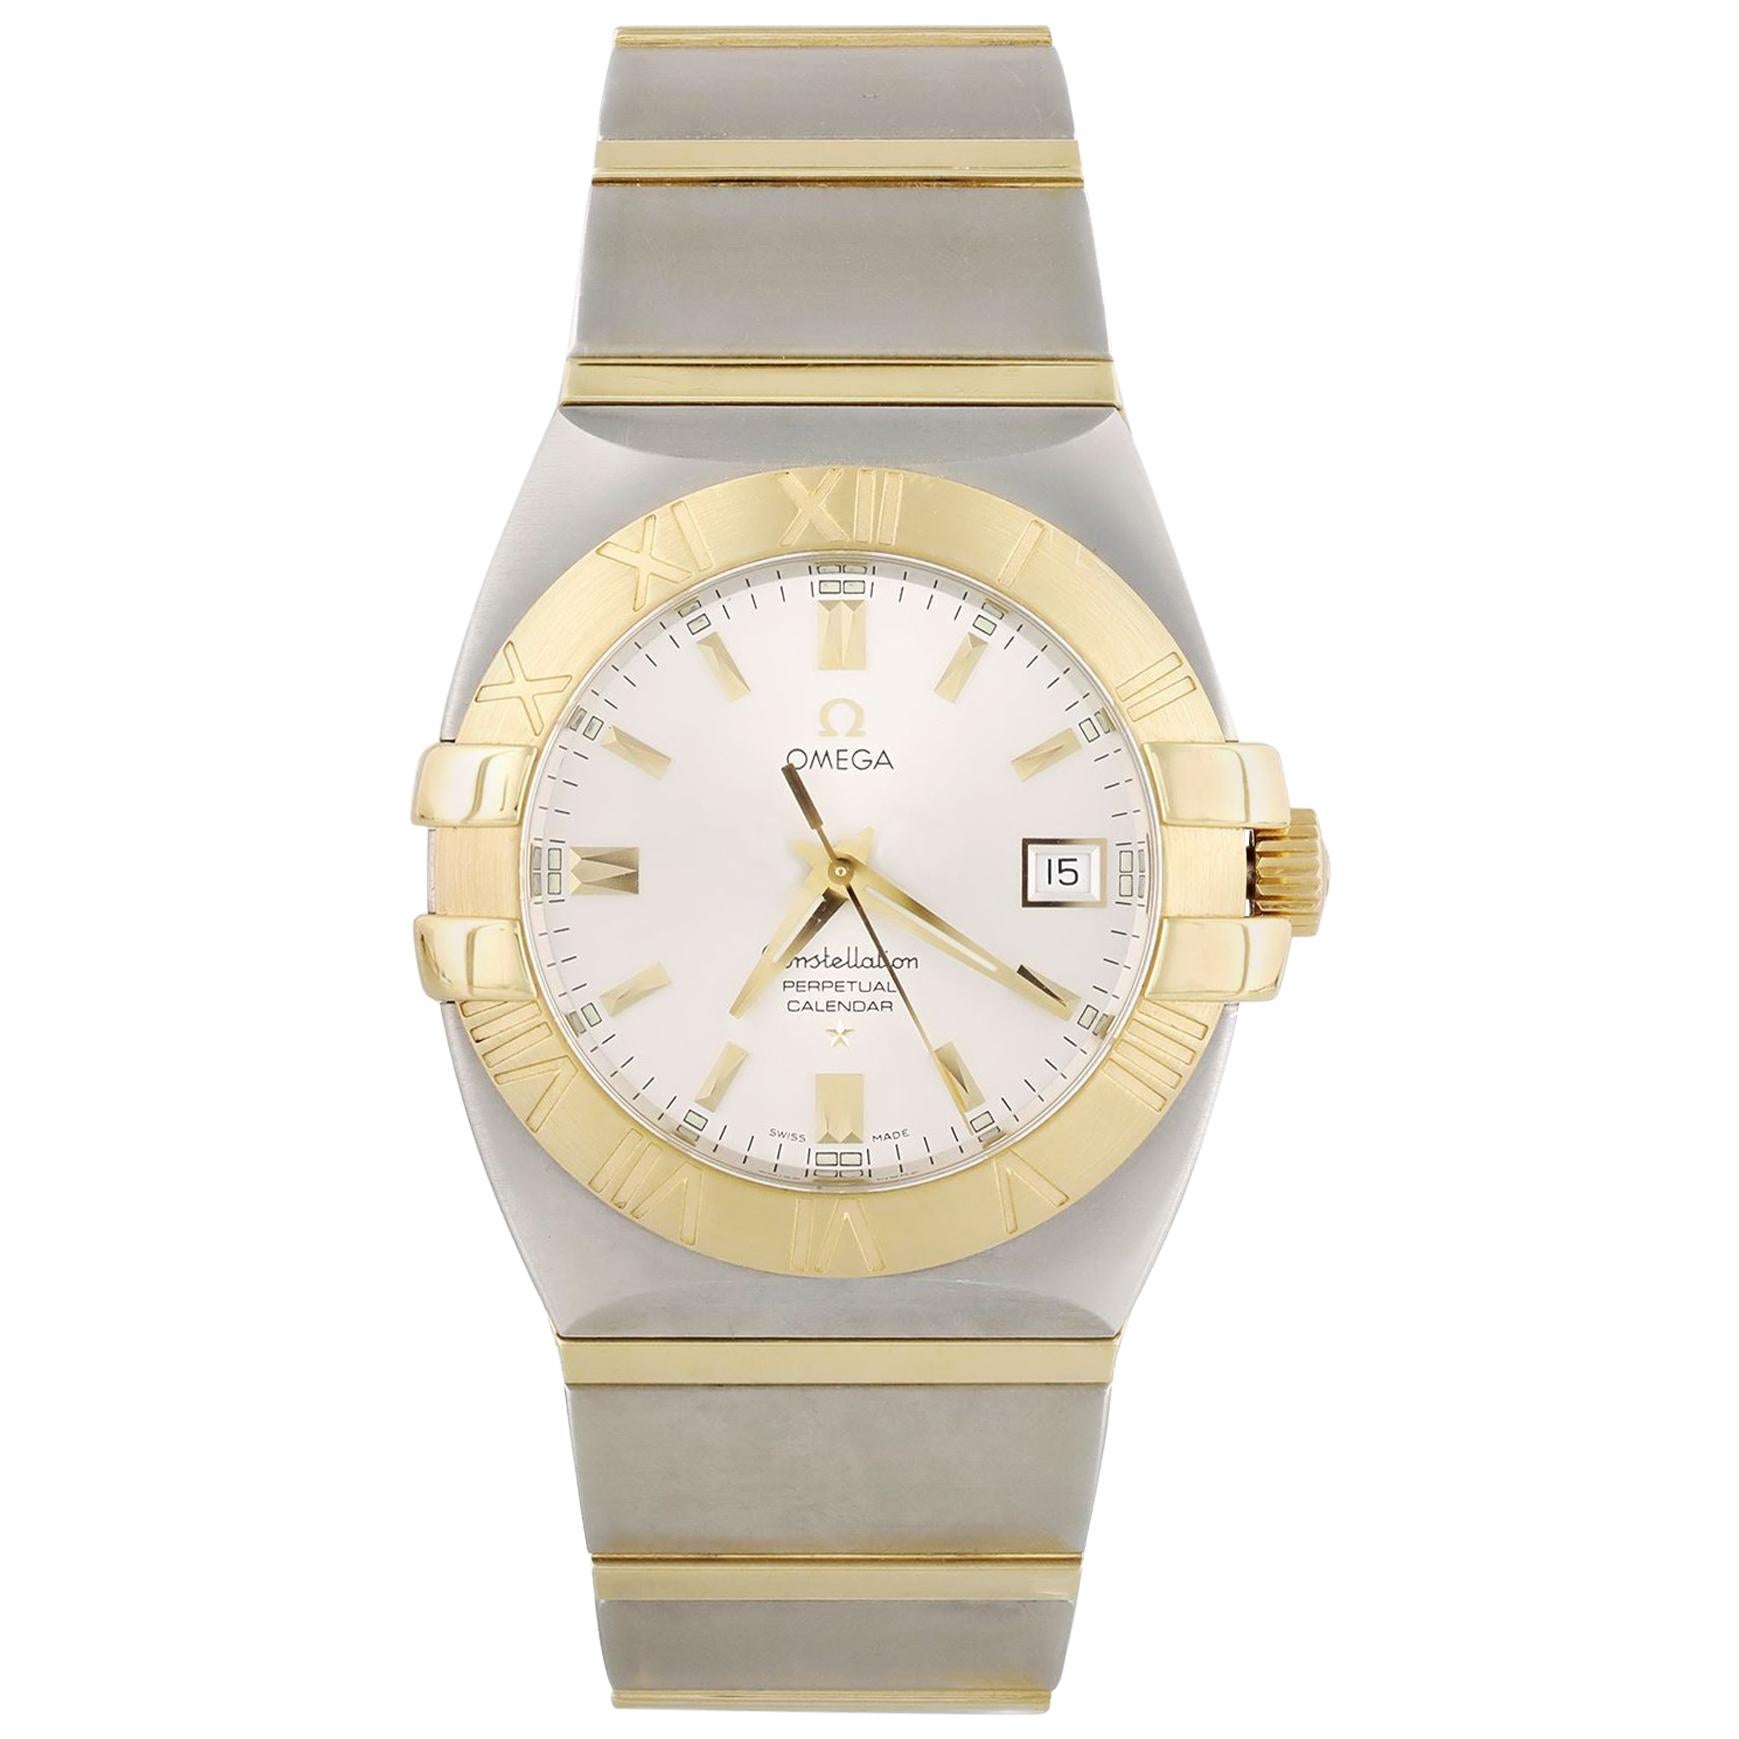 Omega Constellation Double Eagle 1213.30.00 Men's Watch For Sale